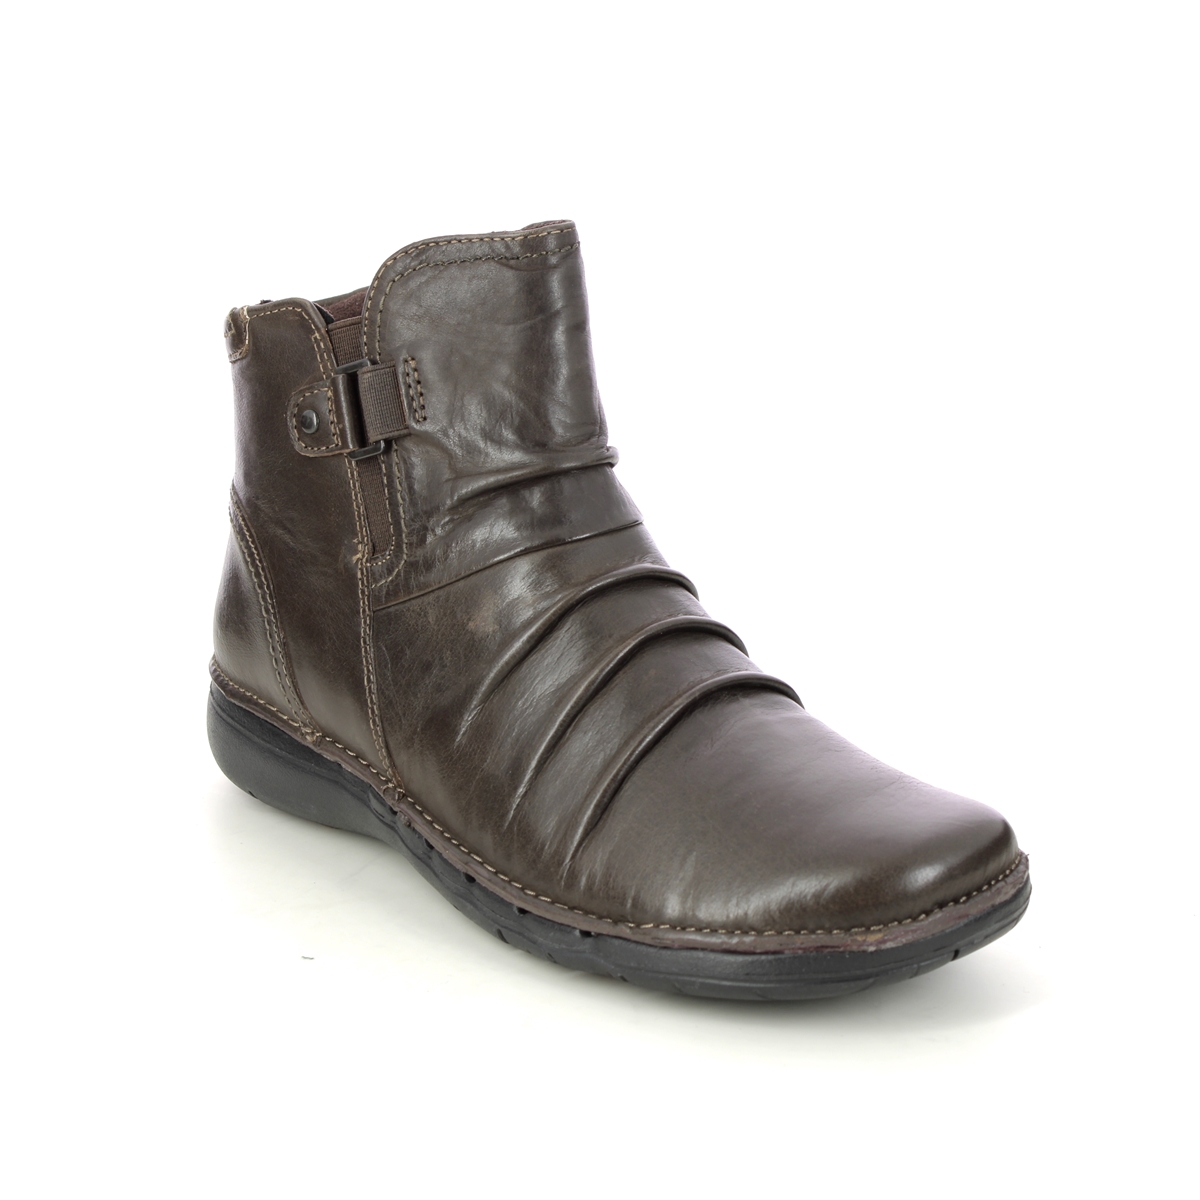 Clarks Un Loop Top Brown Leather Womens Ankle Boots 686624D In Size 8 In Plain Brown Leather